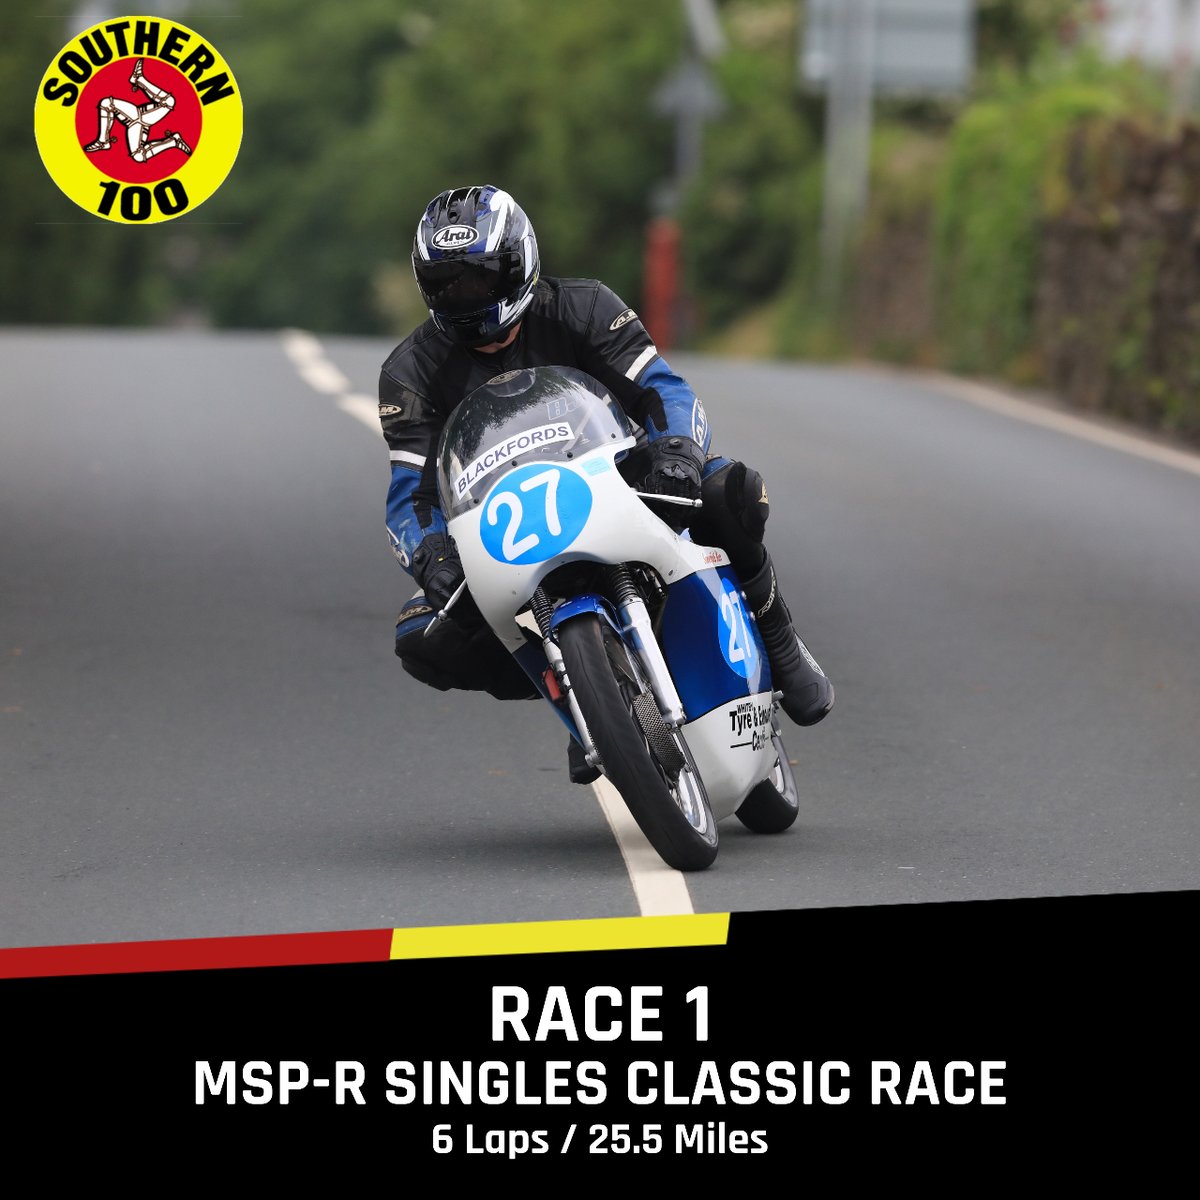 Roads around the Colas Billown Circuit are now closed and it is time to go racing! First up is the MSP-R Singles Classic Race which contains two classes: 🏁 Class 1 - 175cc to 250cc (Green Plates) 🏁 Class 2 - 251cc to 350cc (Blue Plates) View the grid > i.mtr.cool/hqospfhkyt